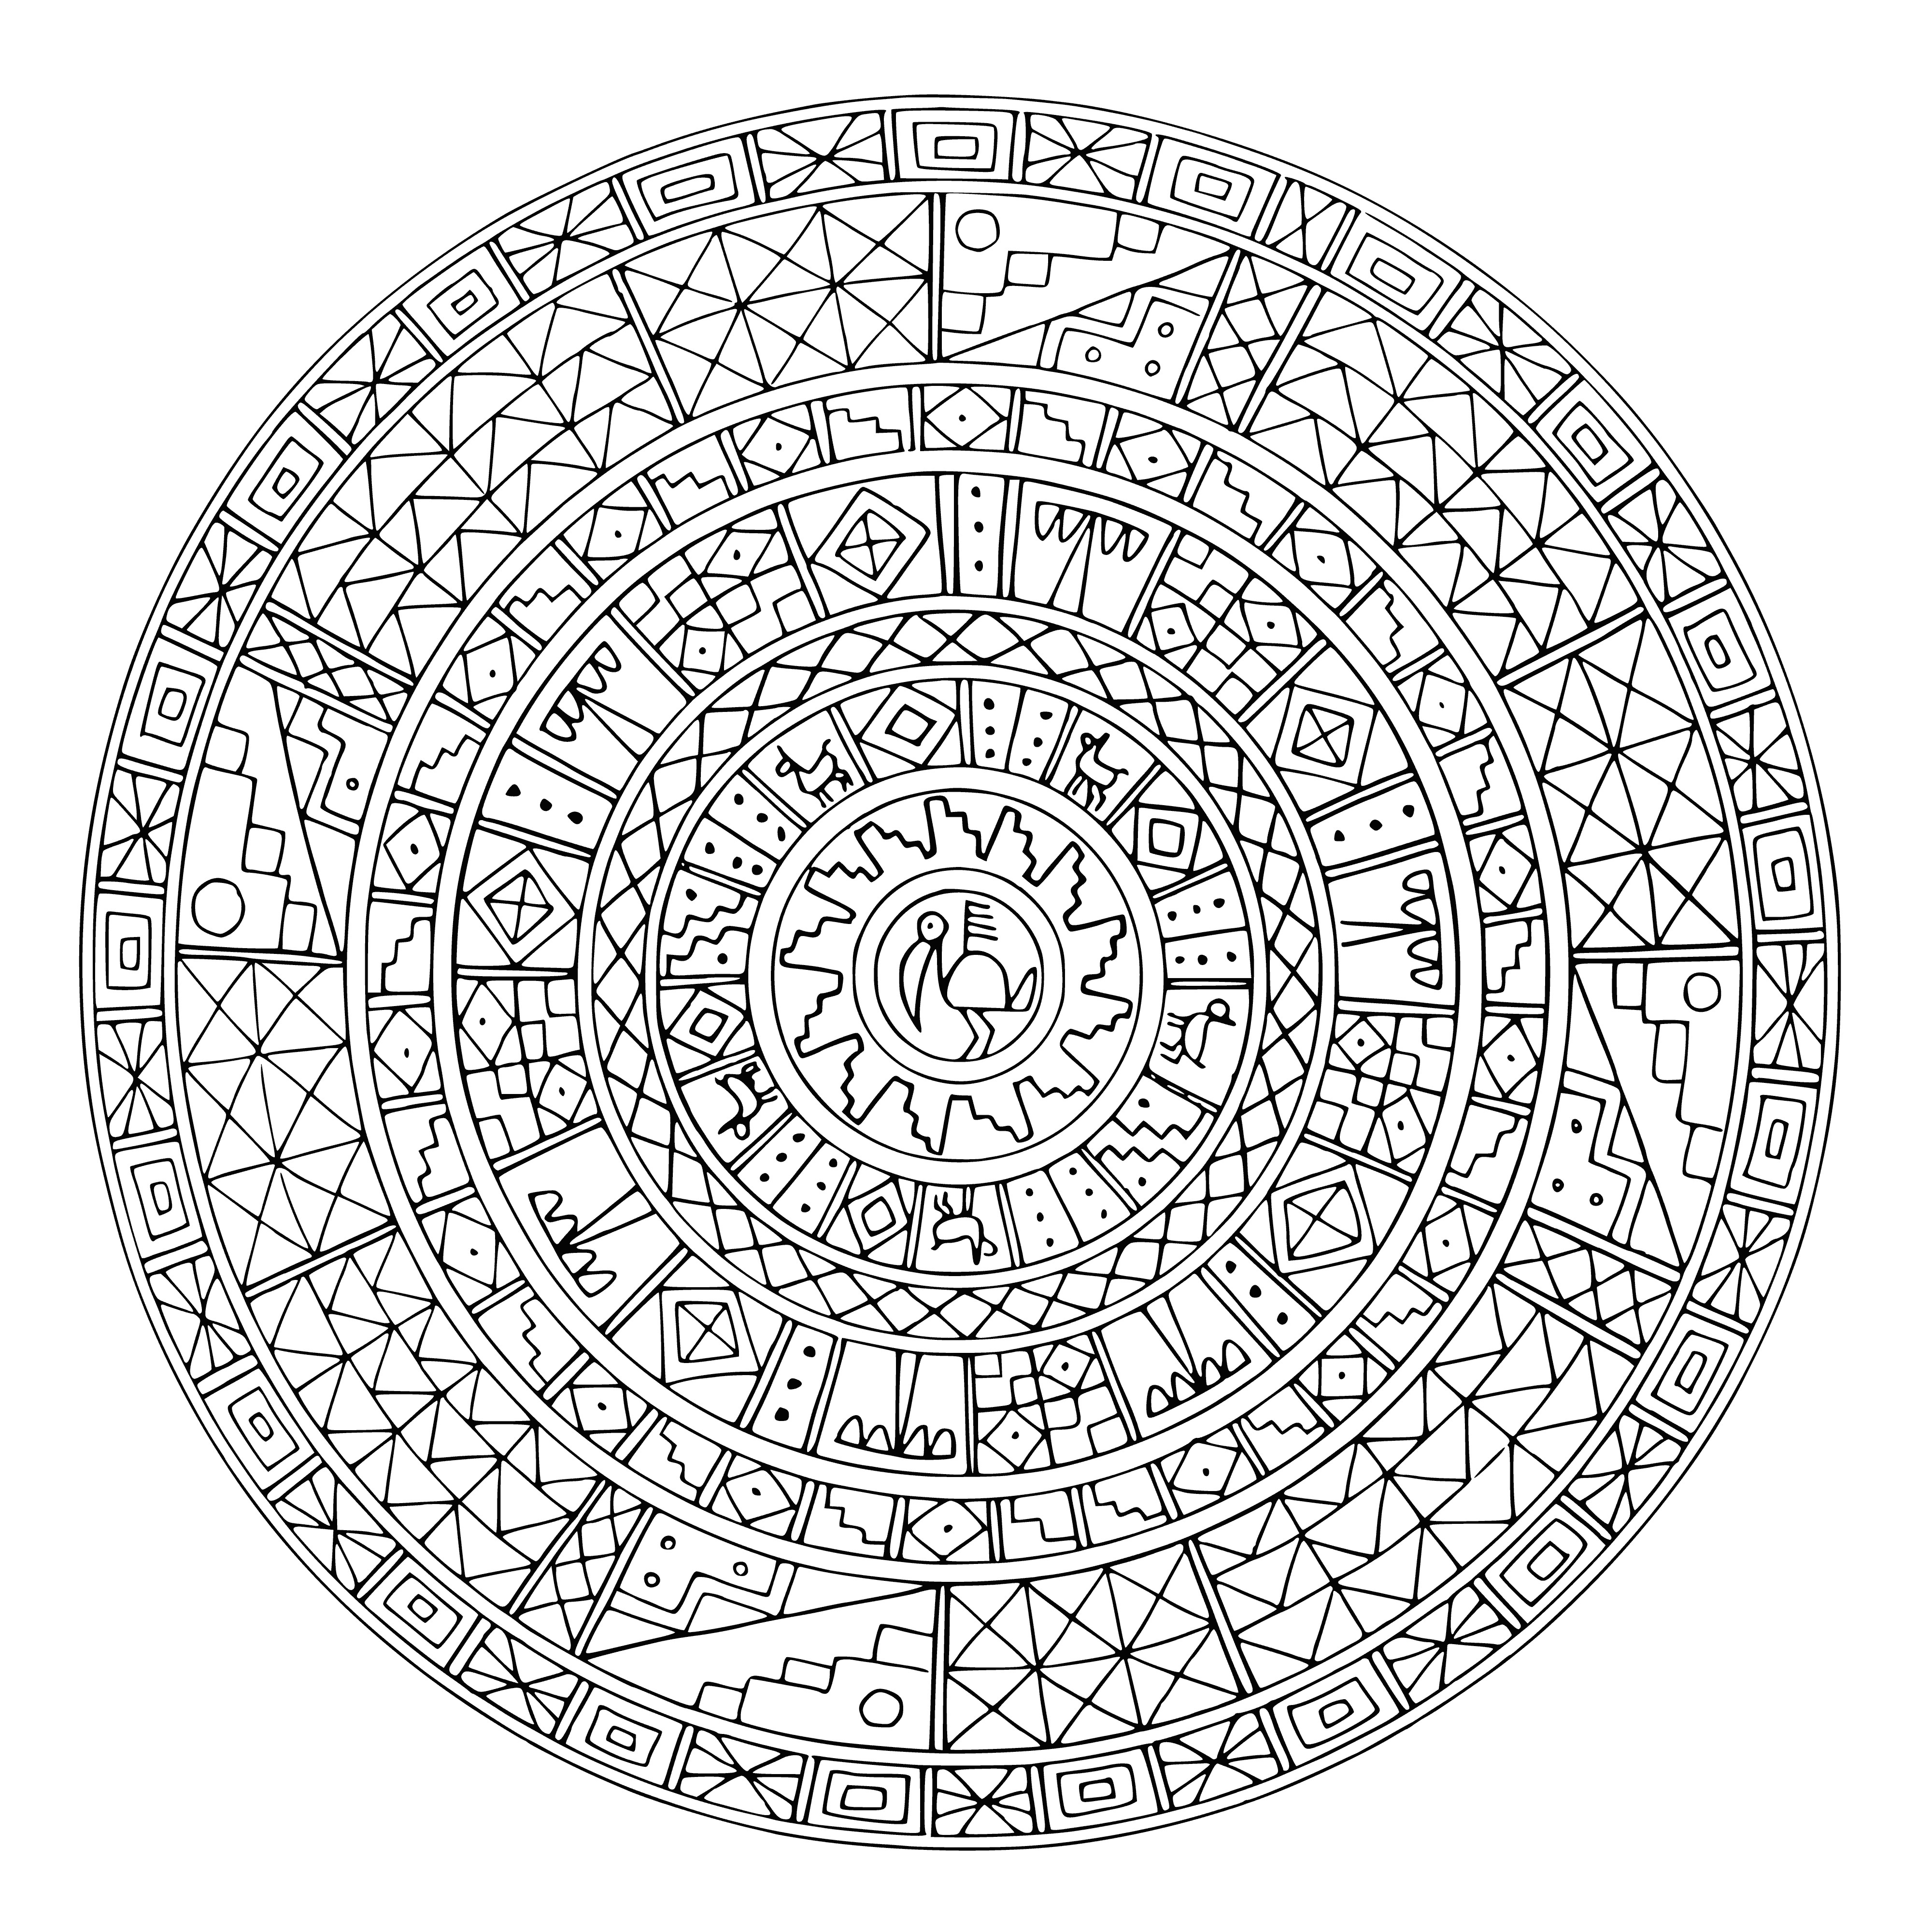 coloring page: A complex, intricate mandala with many patterns and colors to color it- a creative challenge! #art #design